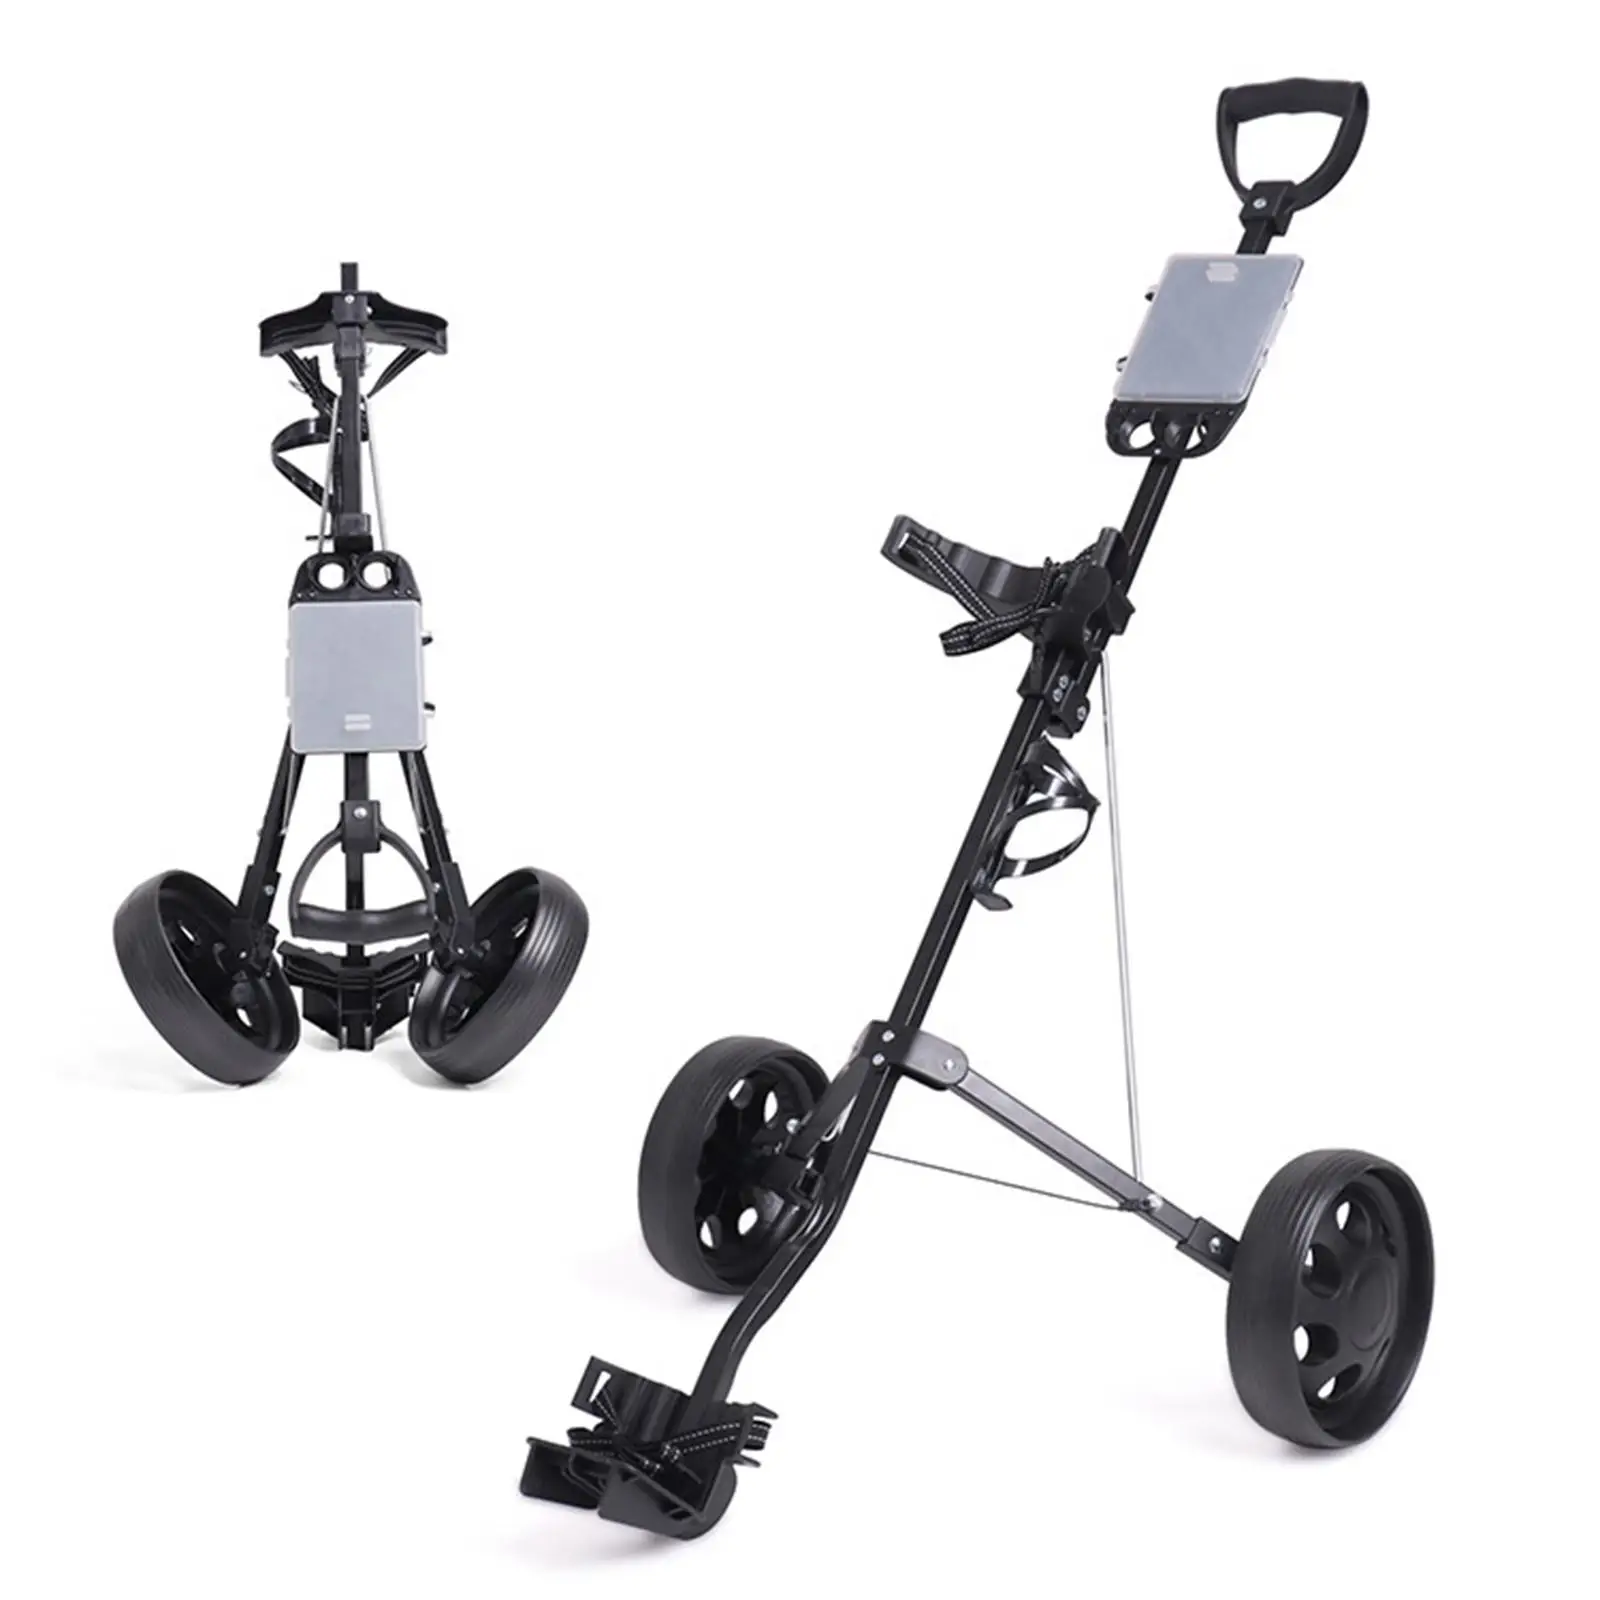 Folding Golf Pull Cart 2 Wheel Cart Collapsible Easy to Carry Portable Golf Trolley for Game Golf Men Kids